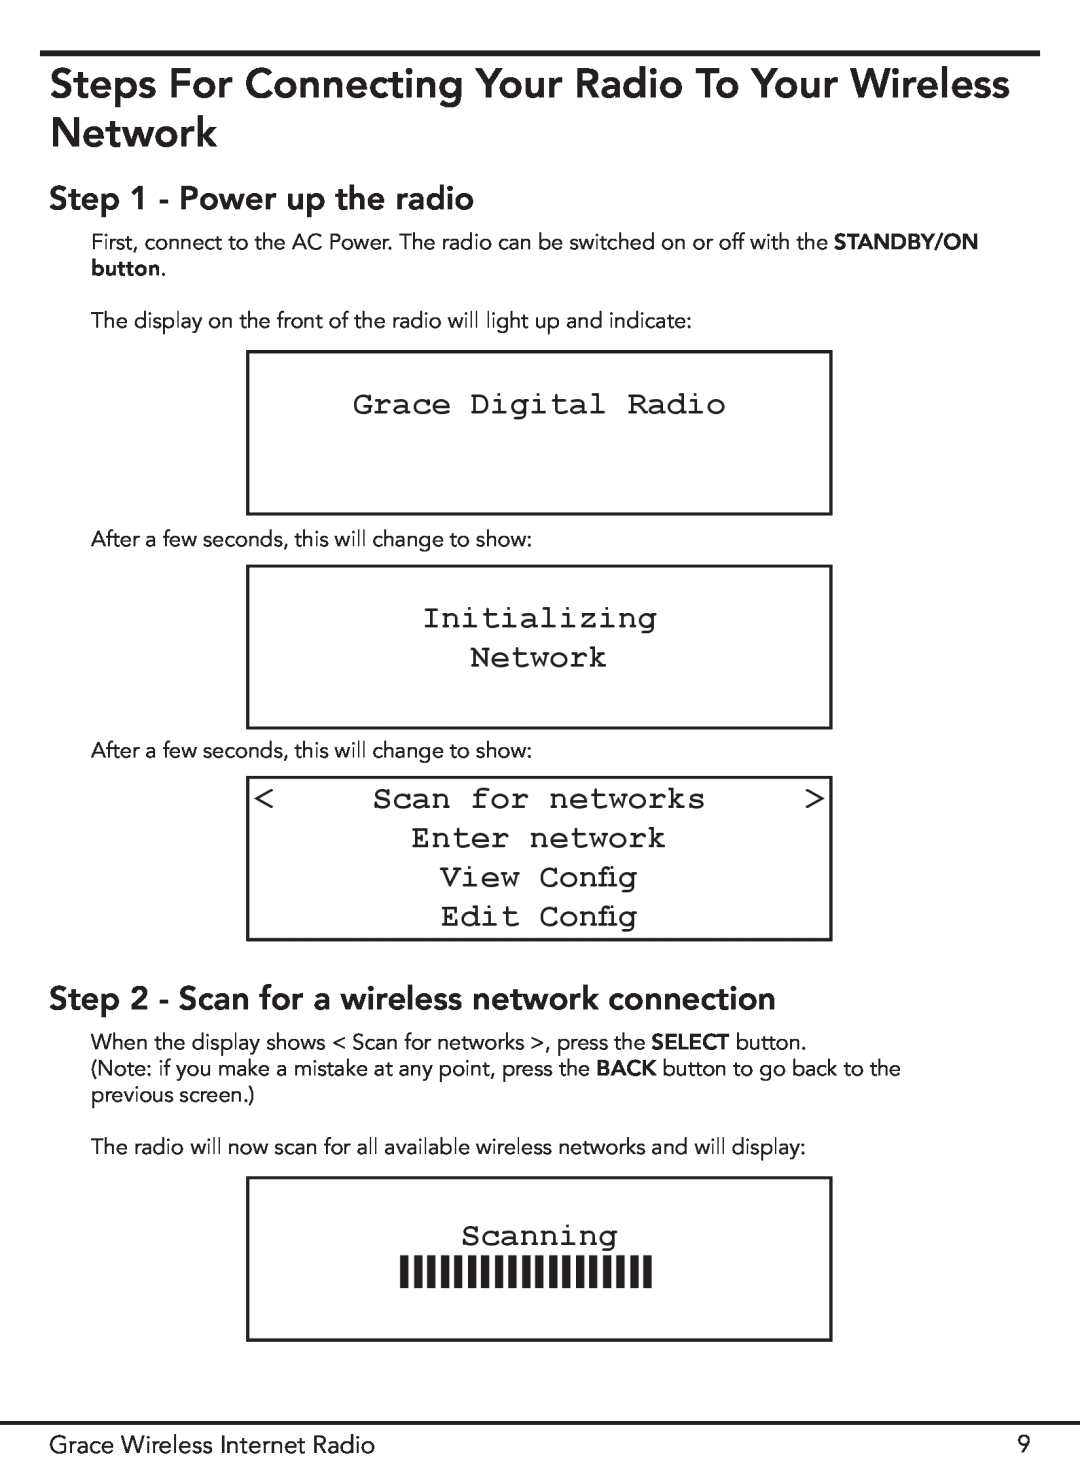 Grace GDI-IR2000 Steps For Connecting Your Radio To Your Wireless Network, Power up the radio, Grace Digital Radio, View 